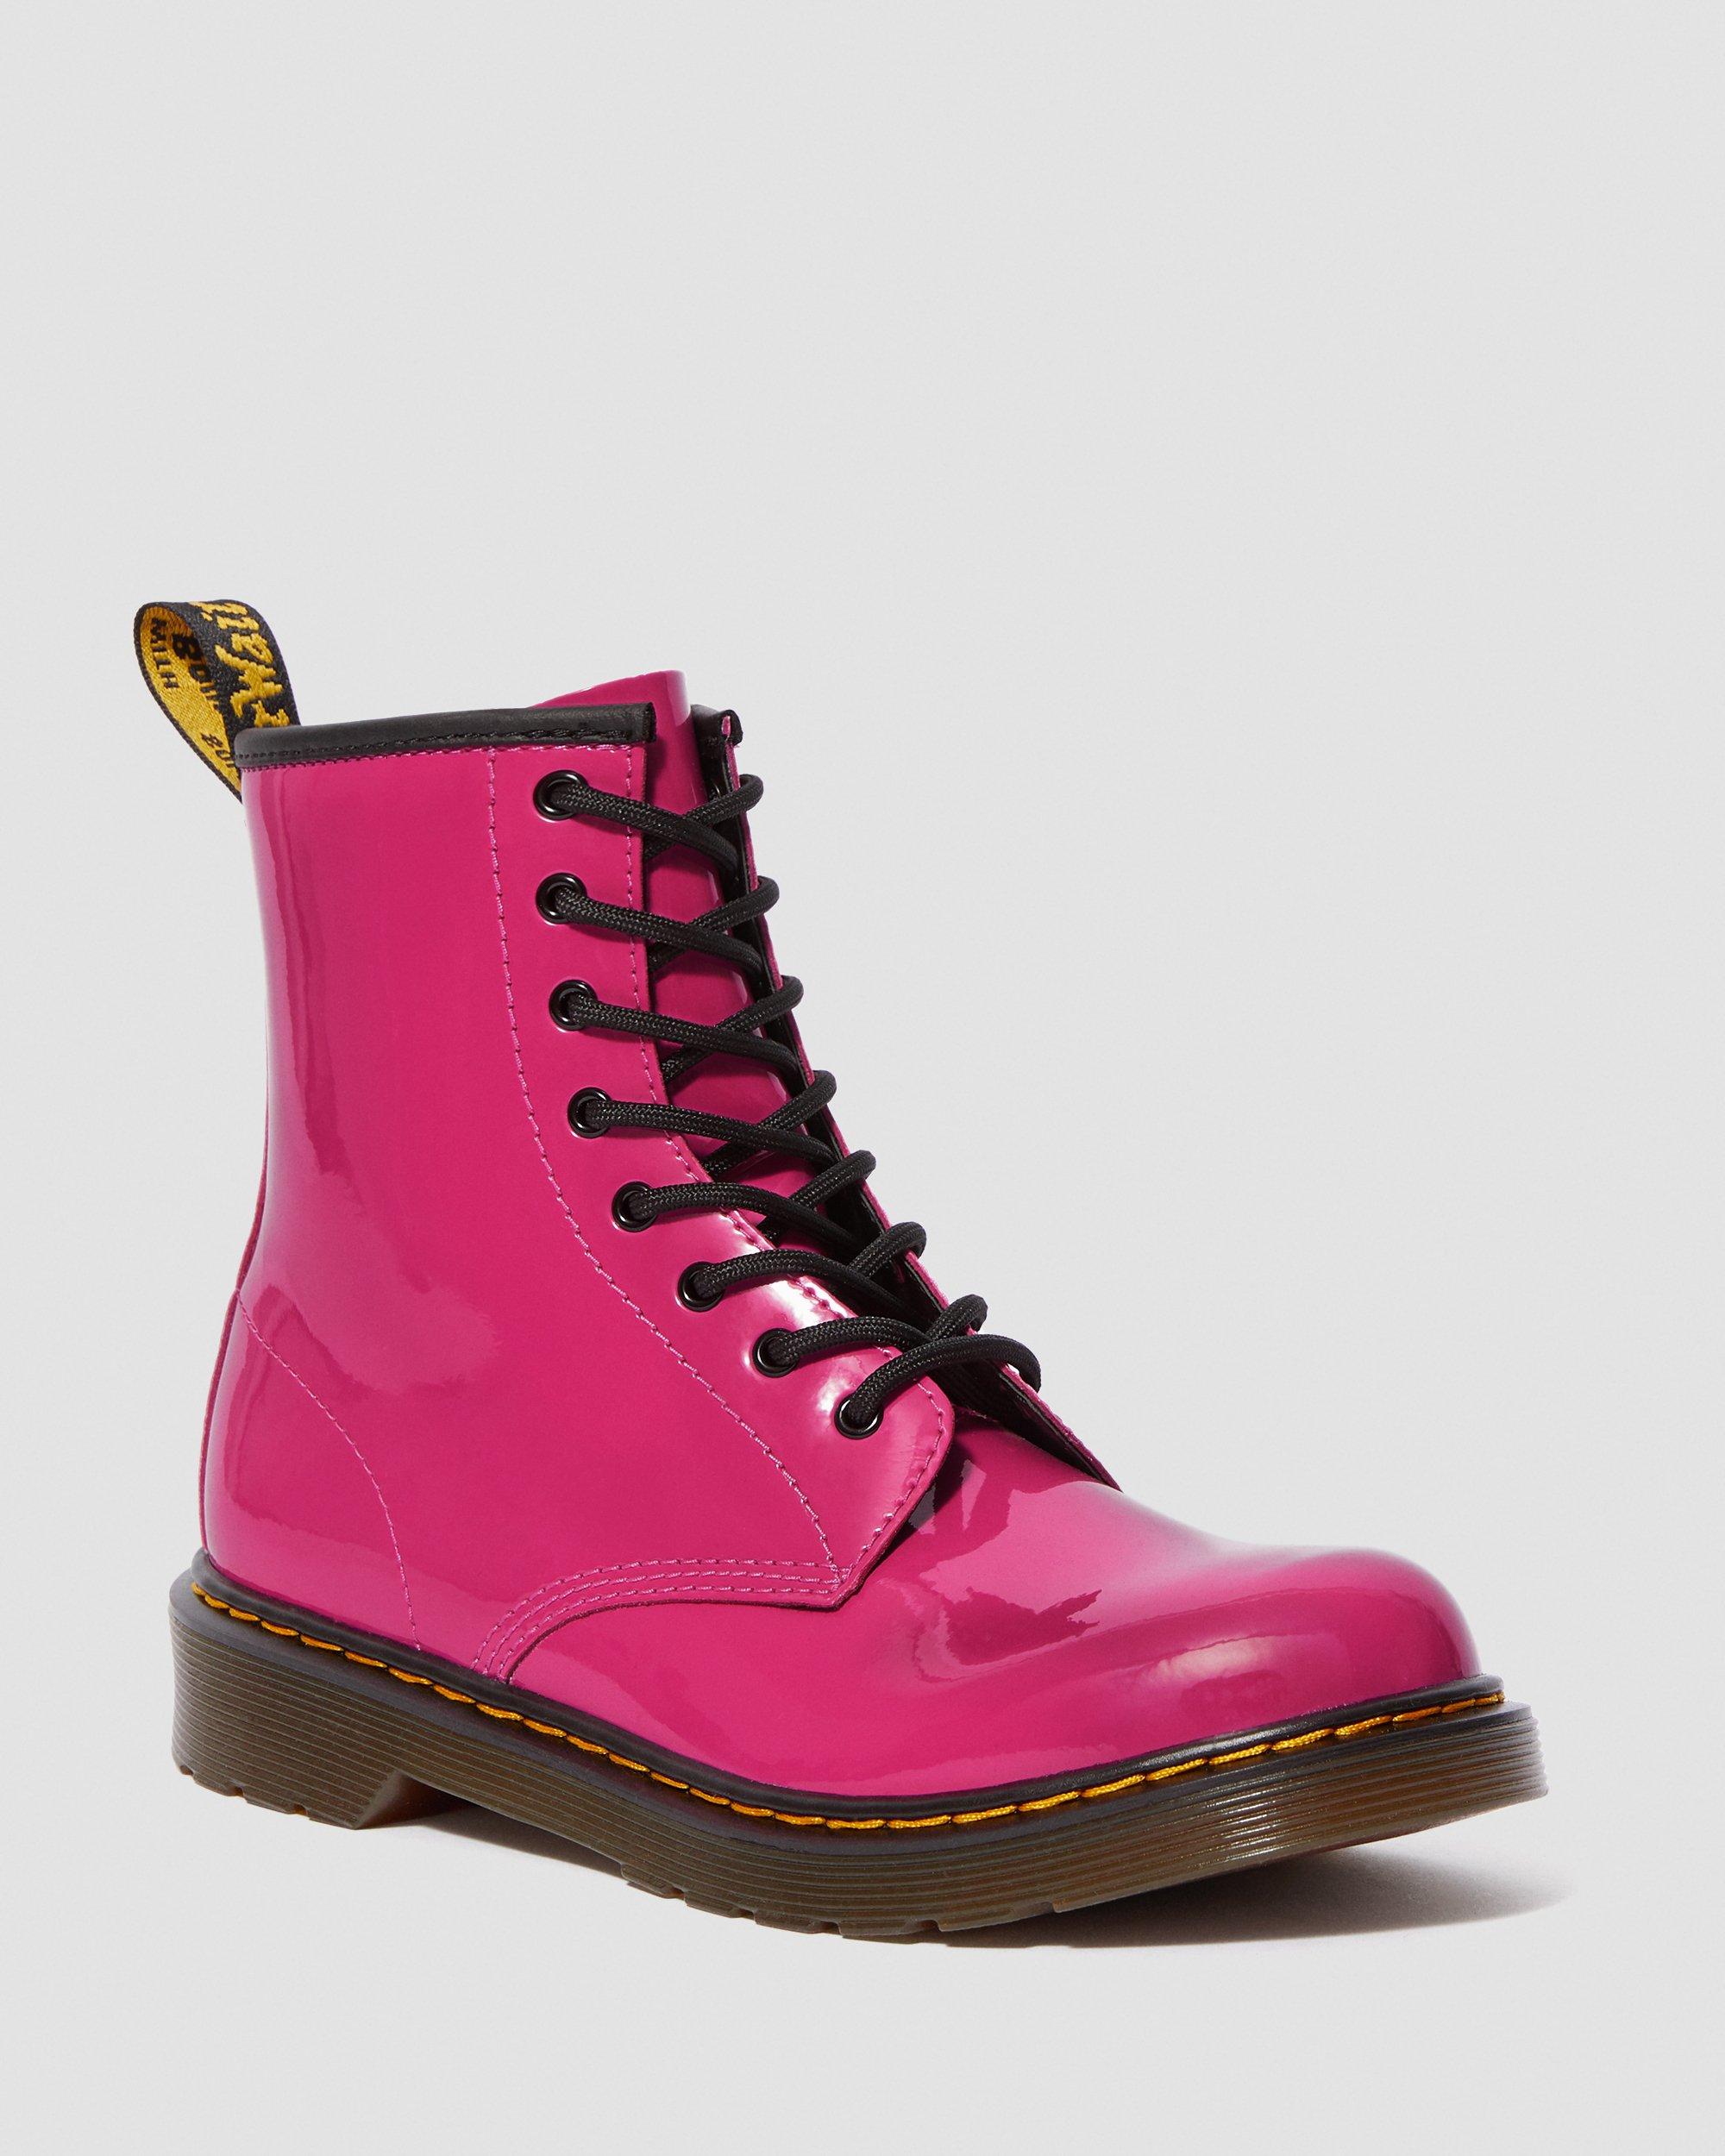 DR MARTENS 1460 Smooth Leather Lace Up Boots | teachingcare.com